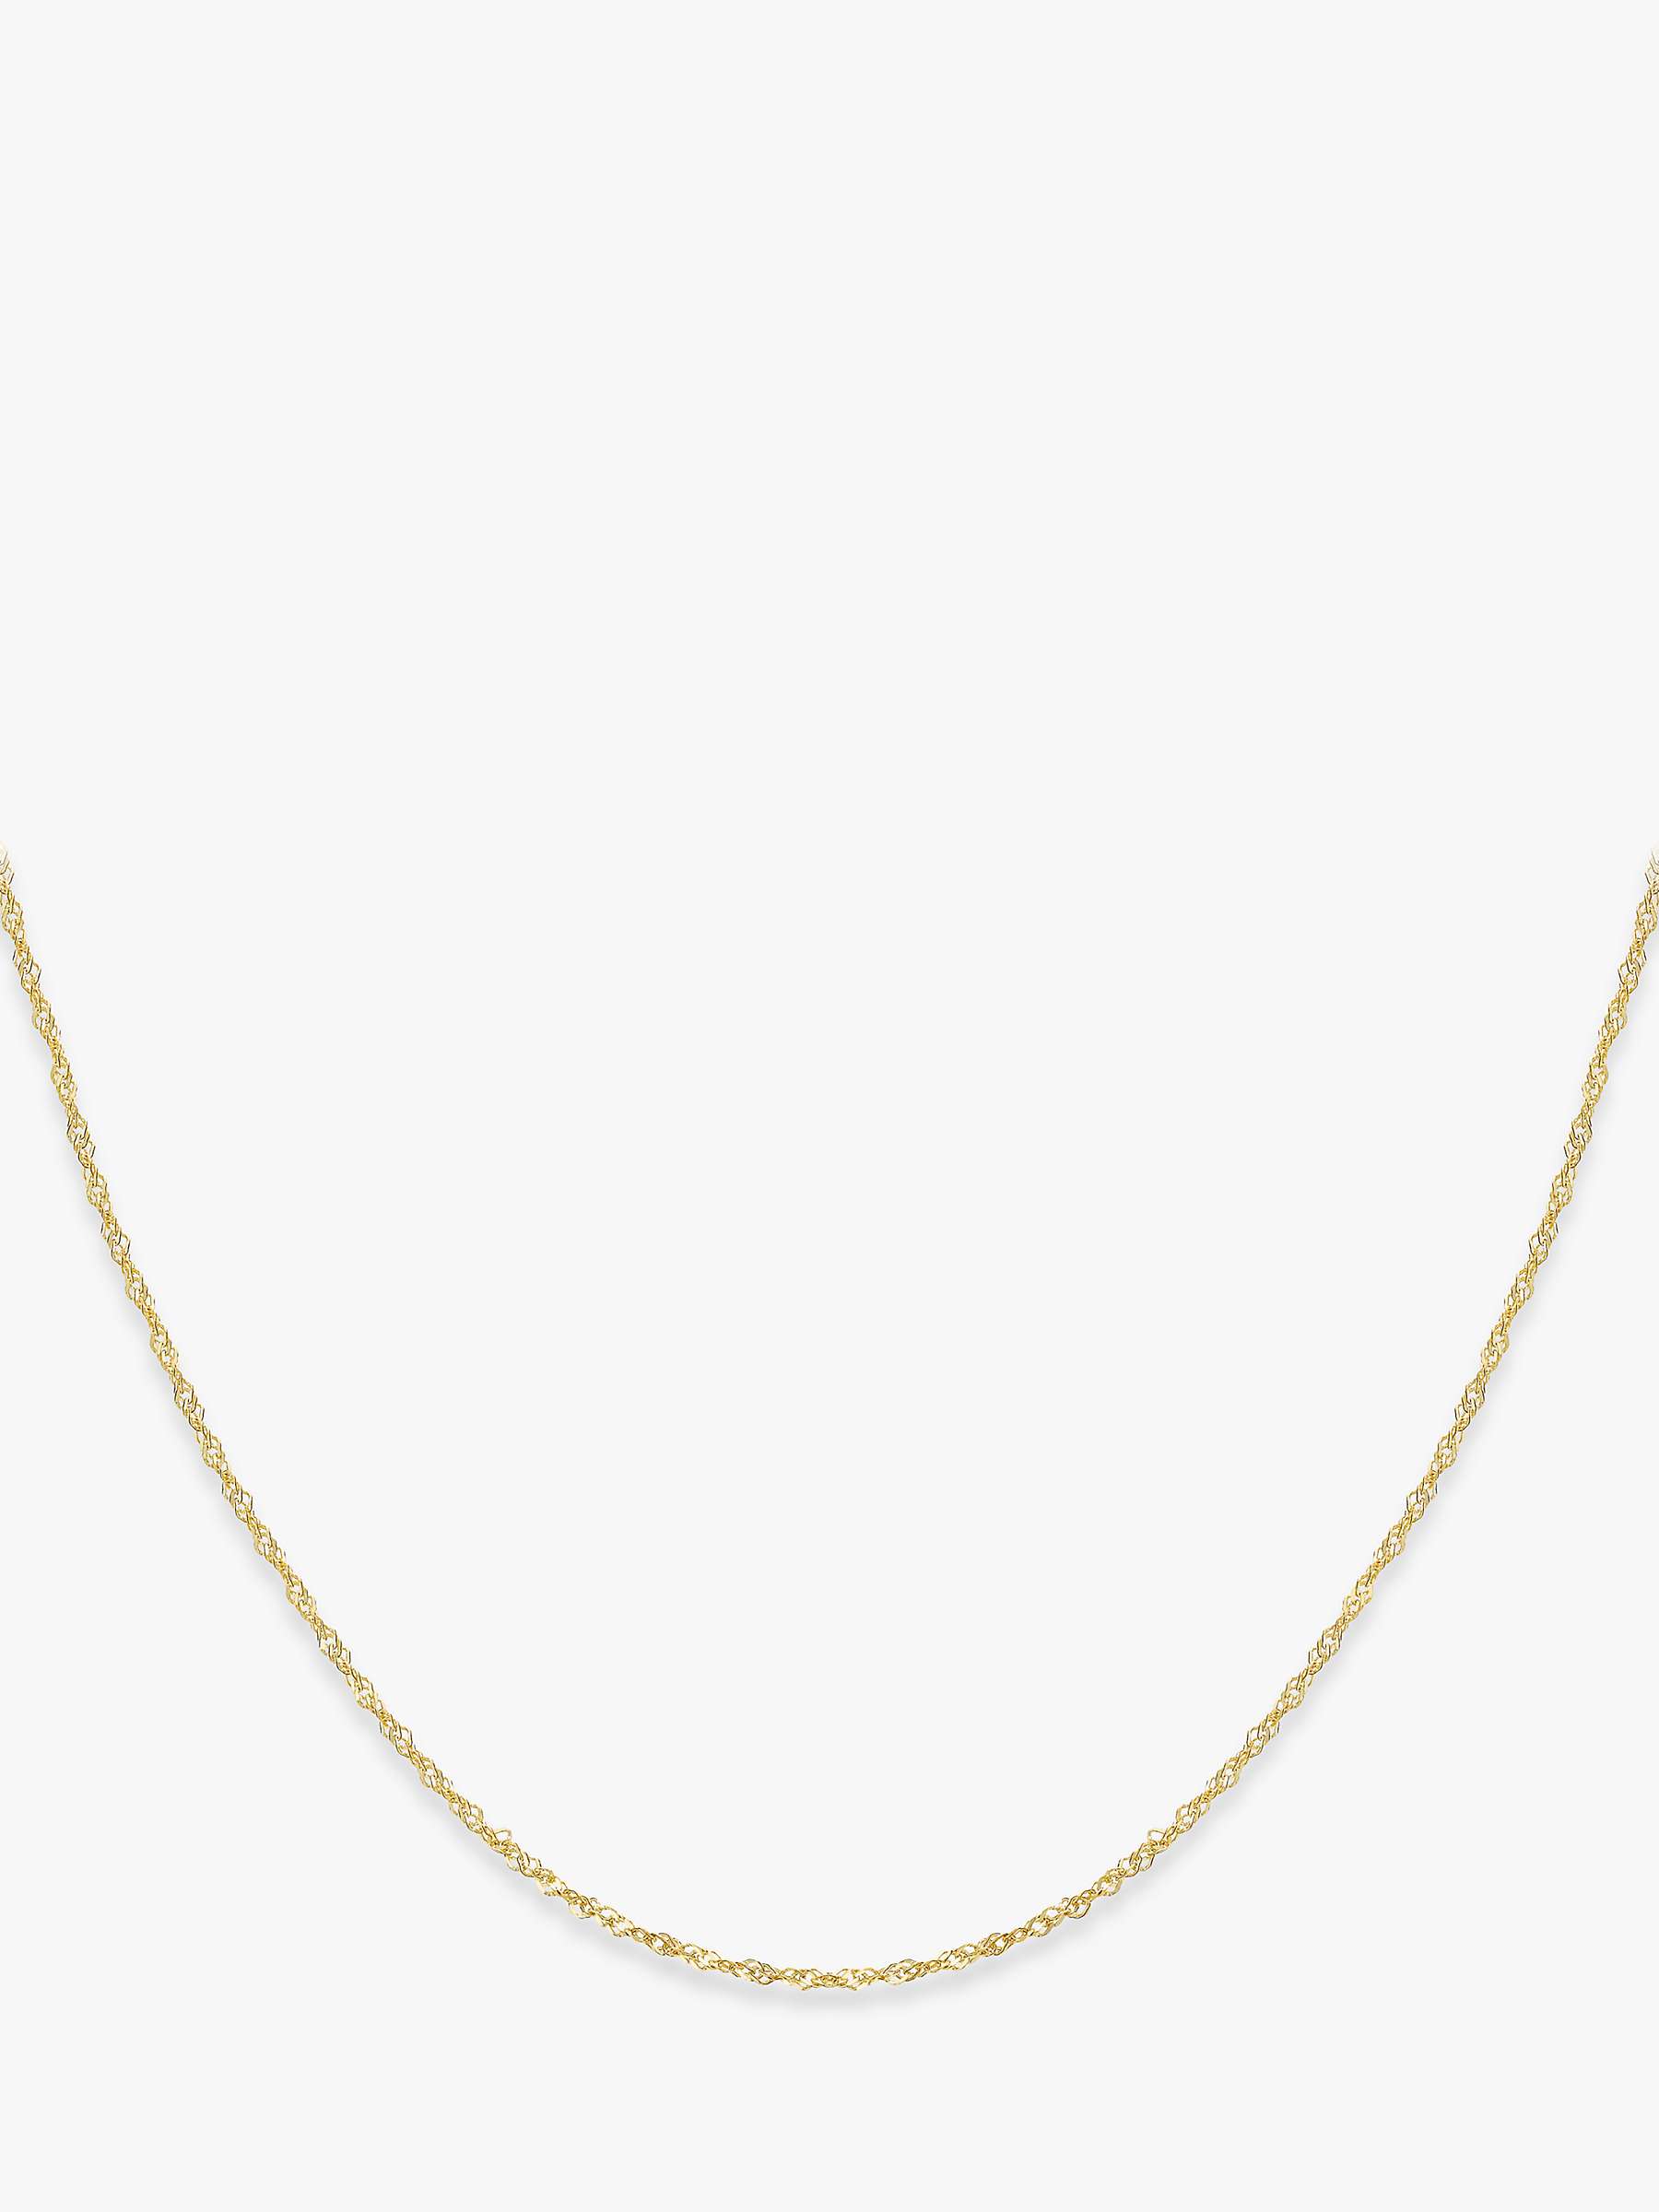 Buy IBB 9ct Yellow Gold Long Hollow Twist Link Chain Necklace, Gold Online at johnlewis.com